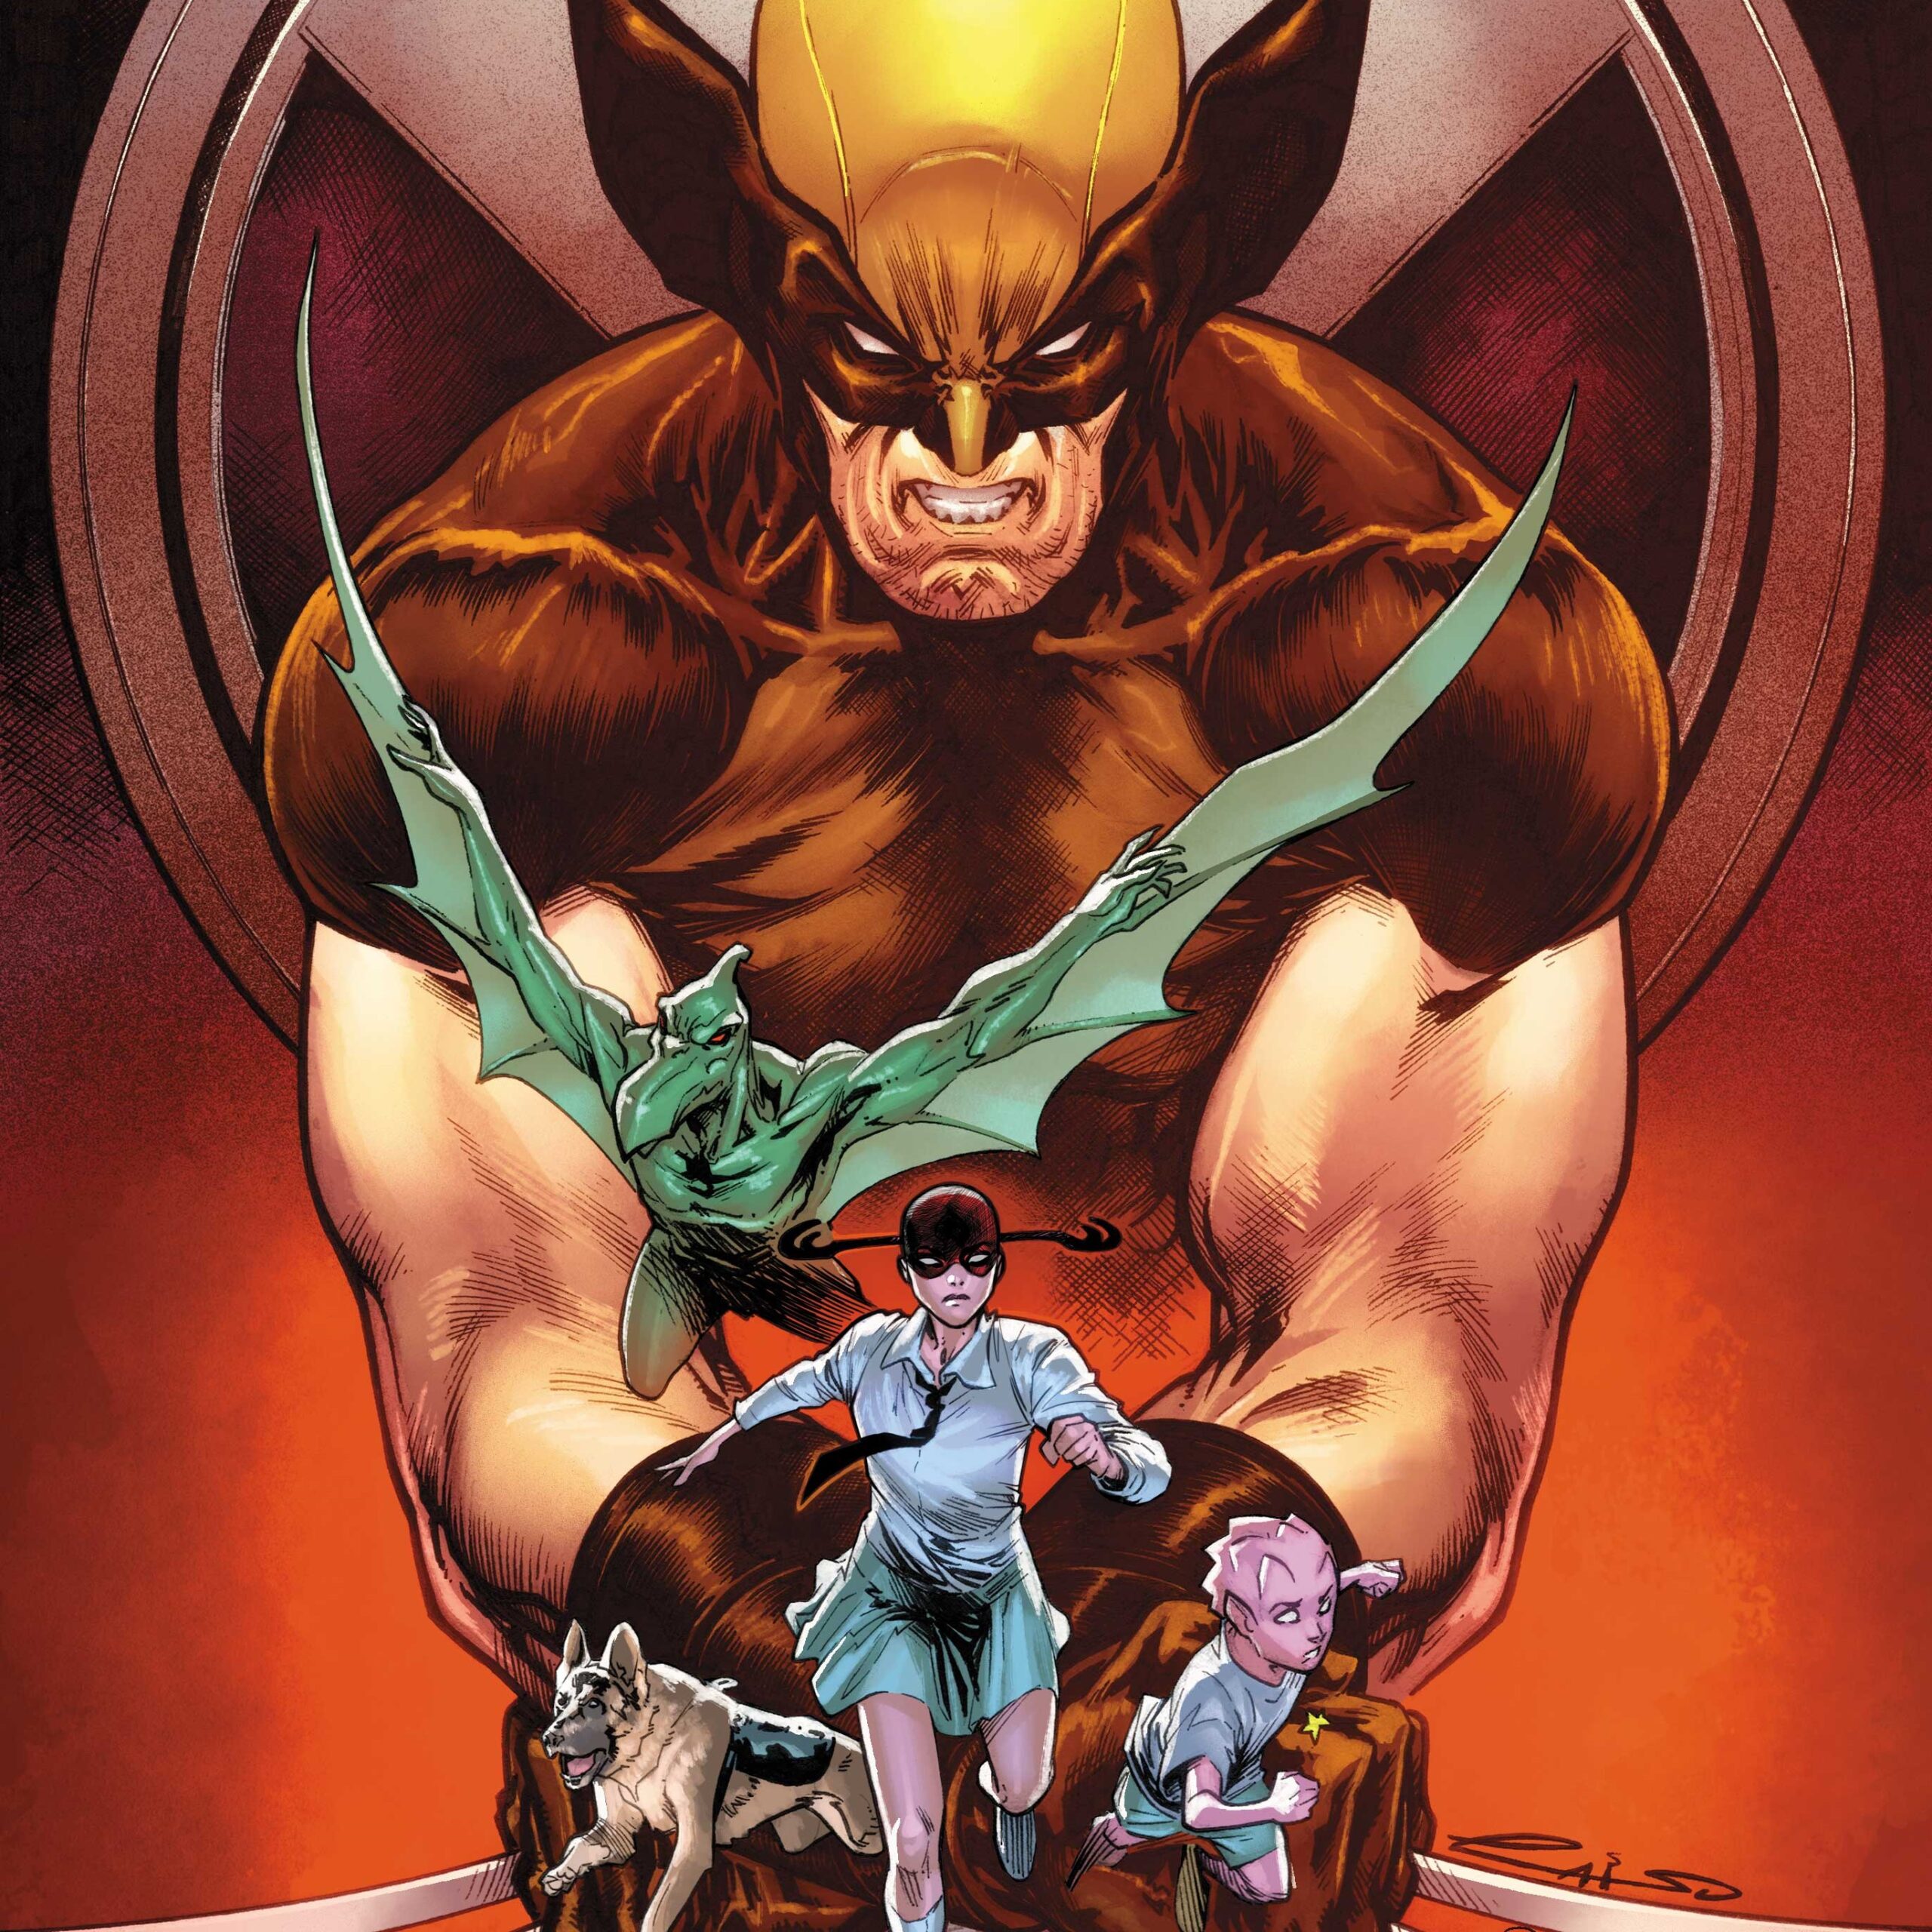 X-MEN UNLIMITED cover art via Anthony Blackwood Marvel Entertainment for use by 360 MAGAZINE